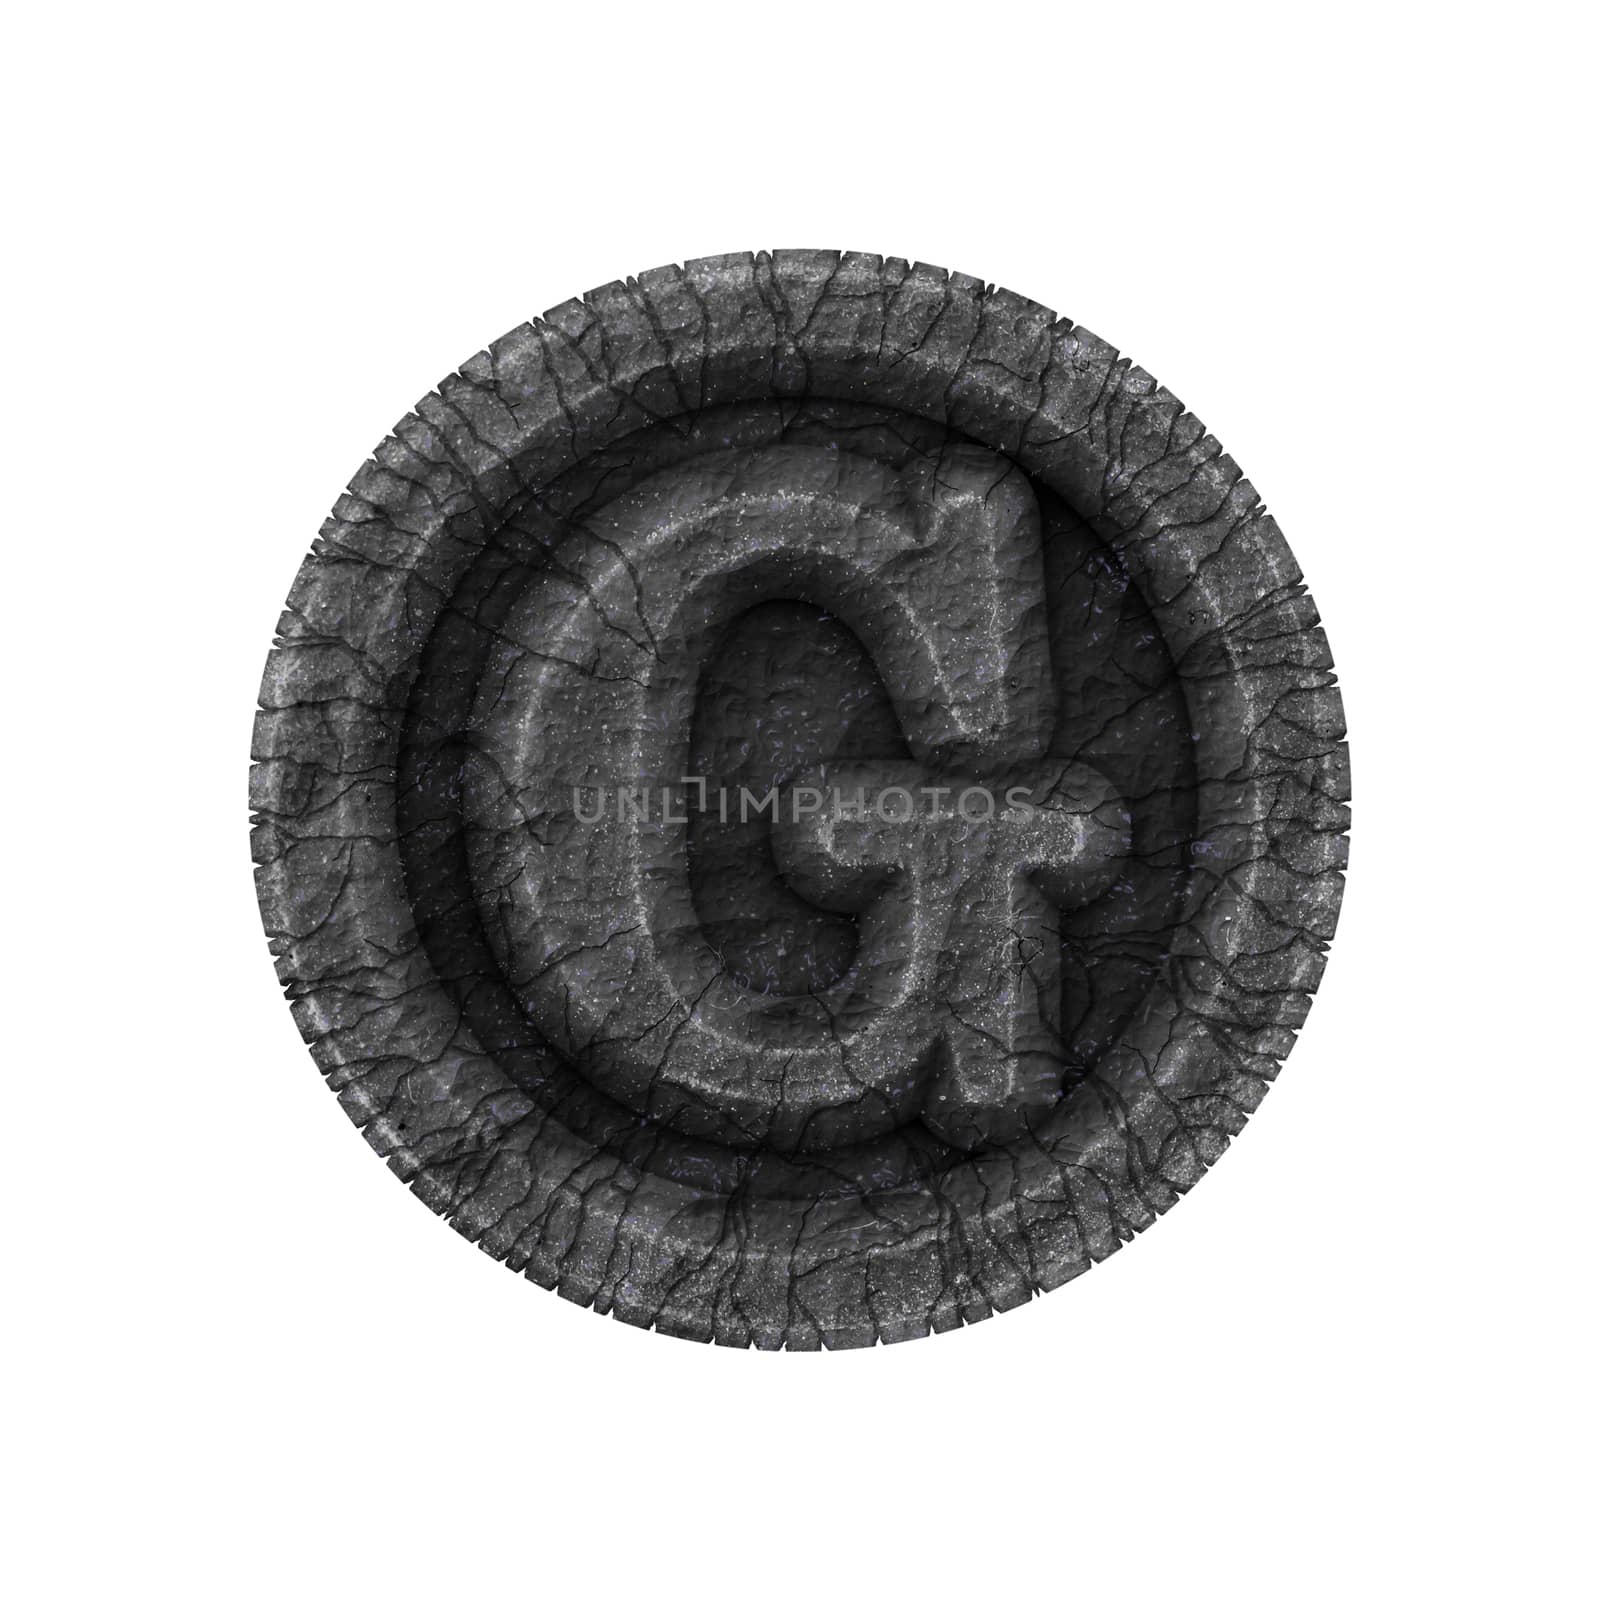 grunge font - letter G by Mibuch